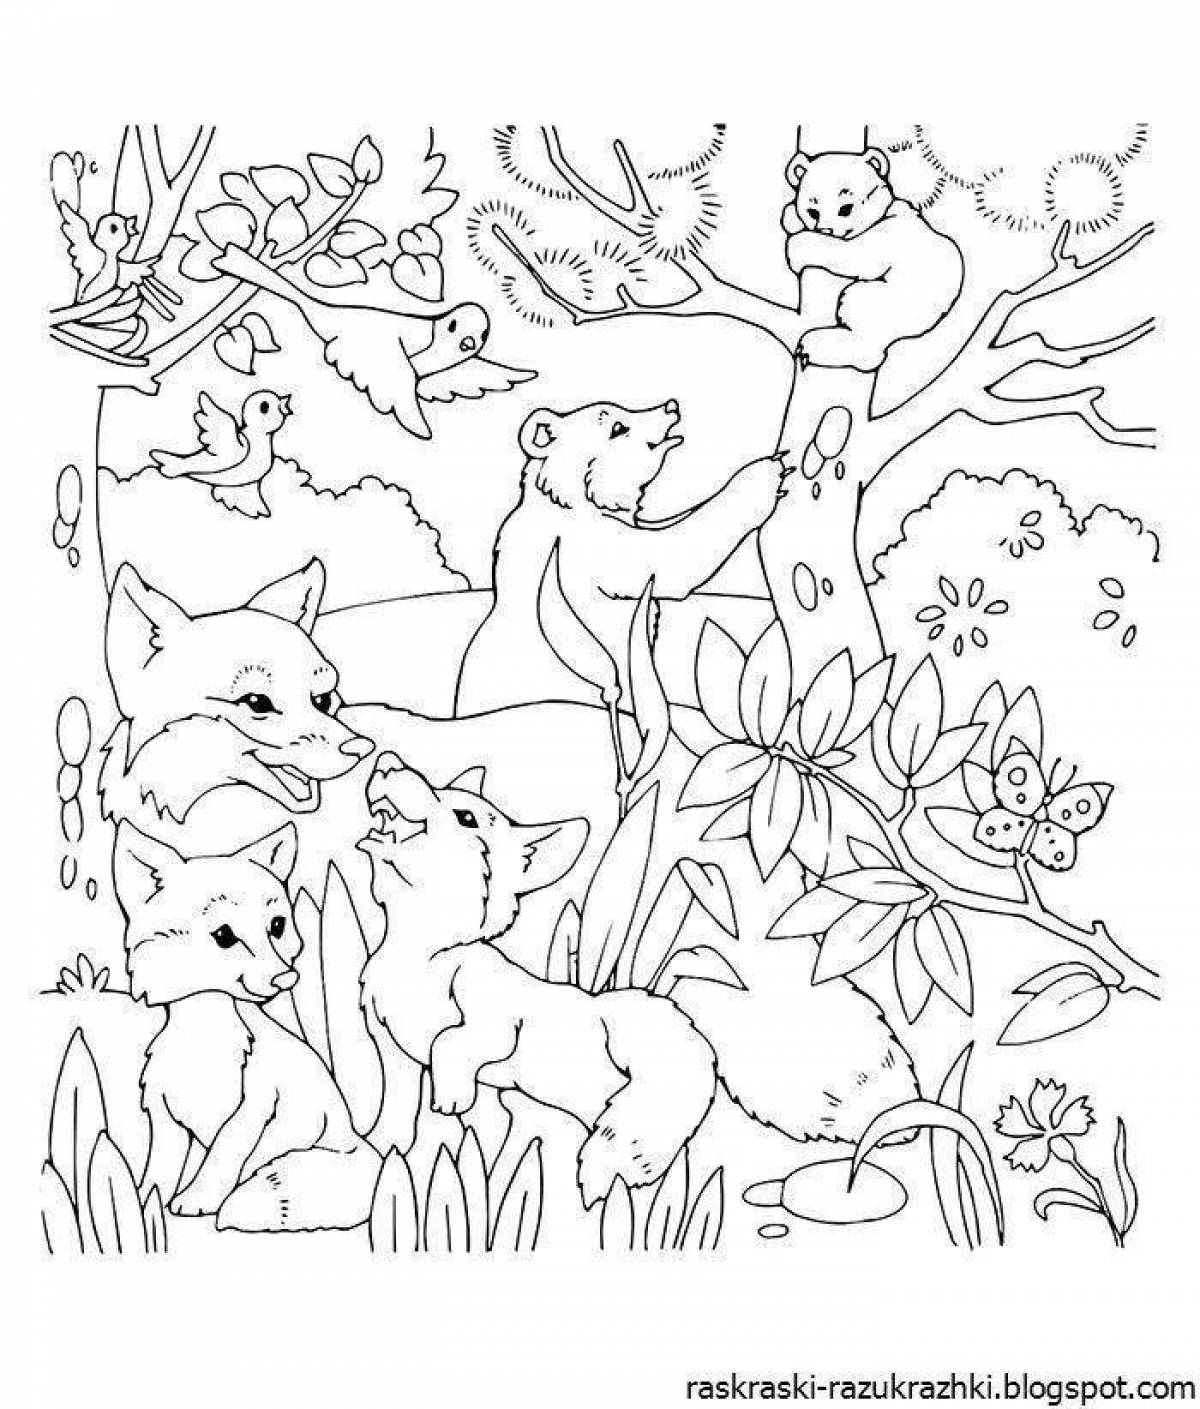 Joyful forest animal coloring page